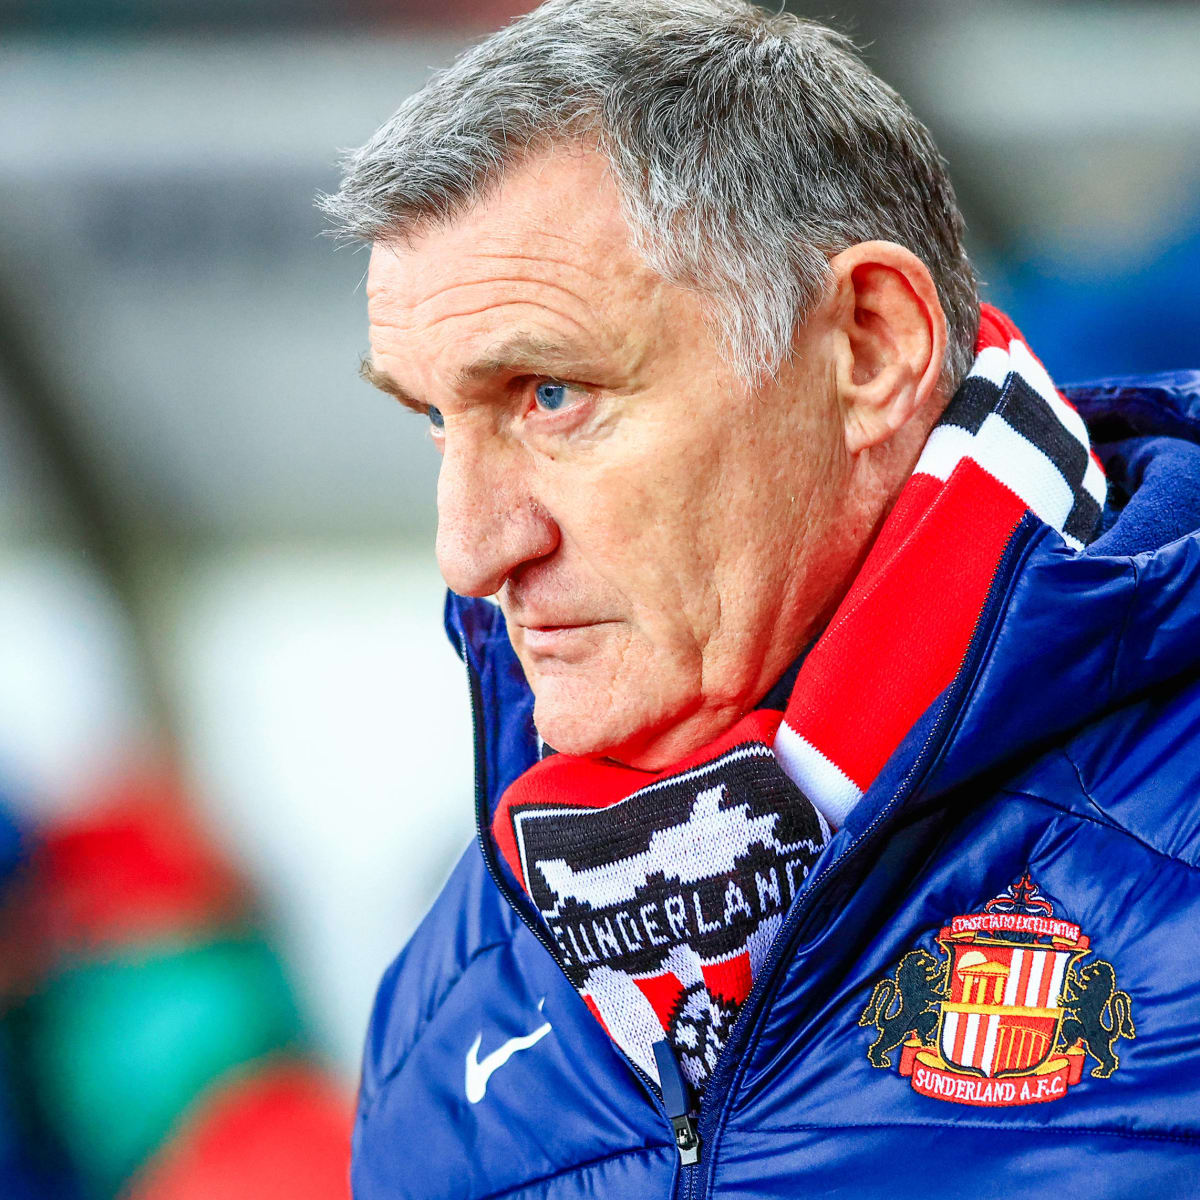 Sunderland AFC has this evening parted company with Head Coach Tony Mowbray.